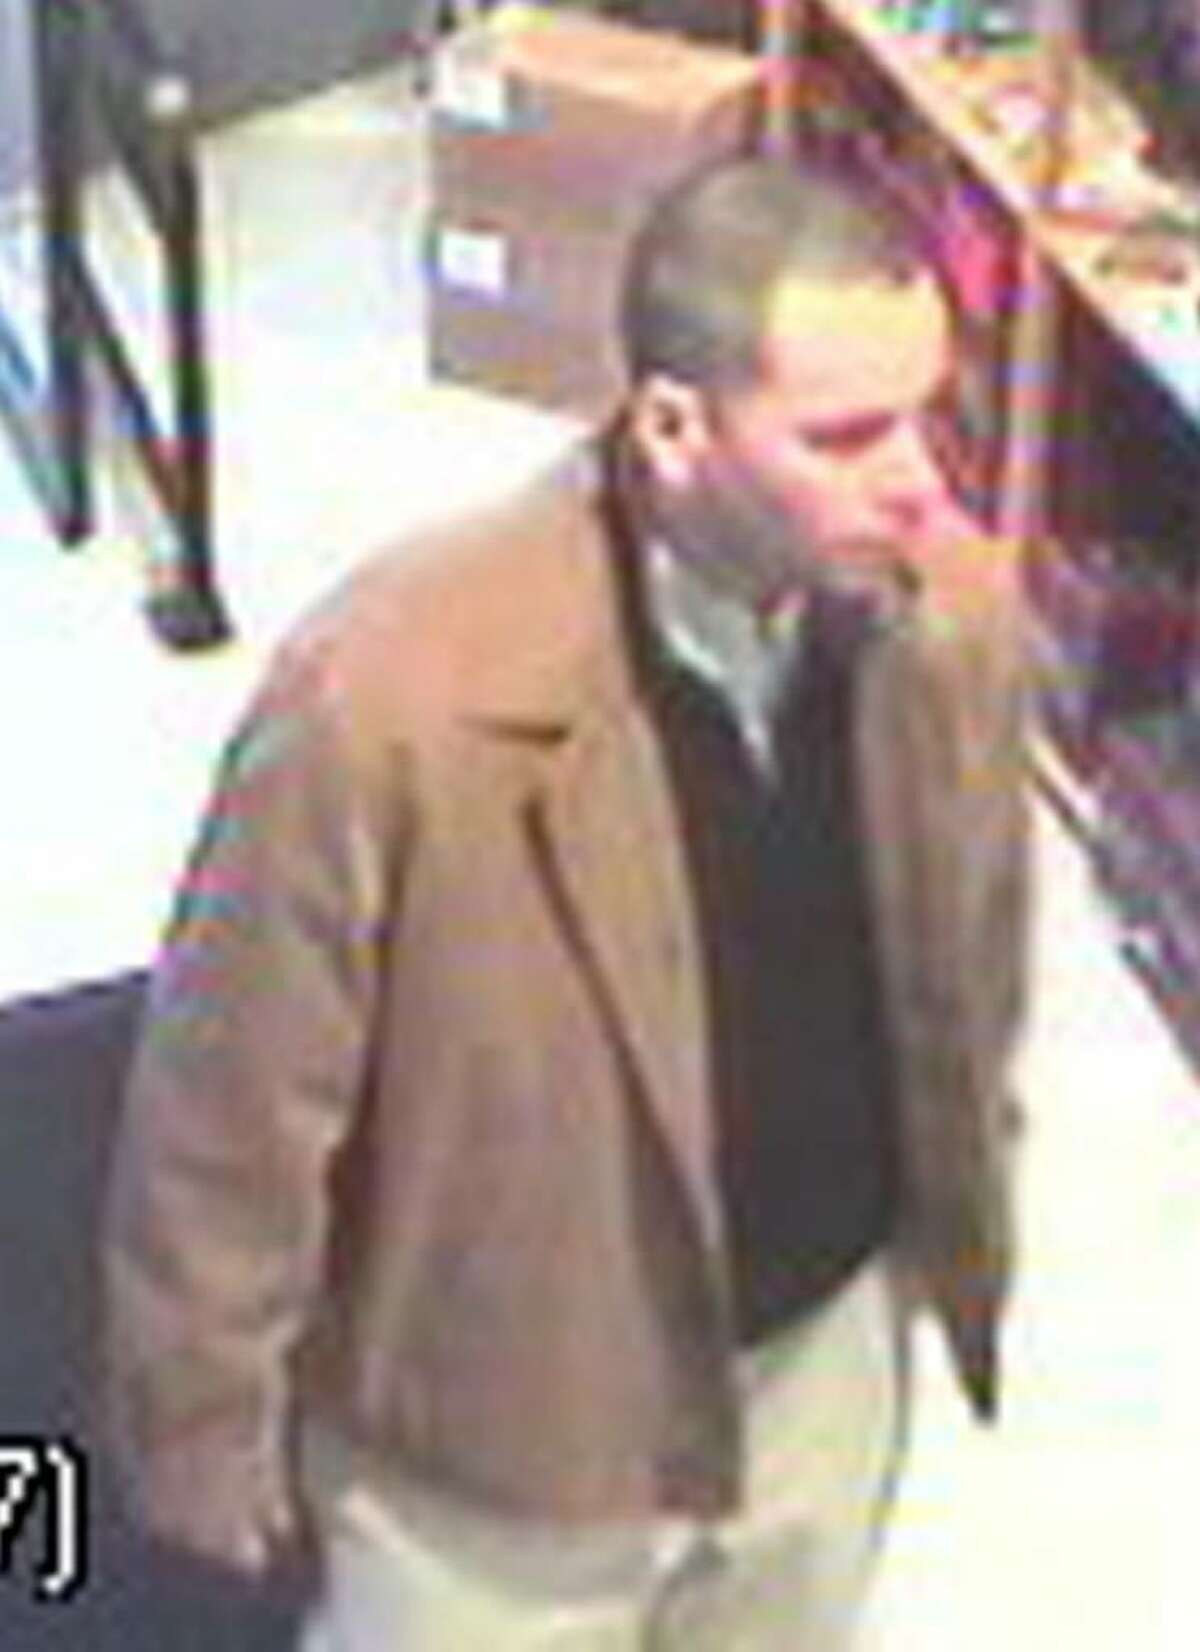 Surveillance camera images of man suspected of spending spree with stolen credit cards. The suspect is described as a white man, about 6 feet tall with a medium build and very short or thinning dark hair. He was dressed in khaki pants and a tan jacket, and wore glasses when he was in one of the stores. He was driving a newer model four-door Jeep Liberty, gold or tan in color, with a retractable roof.